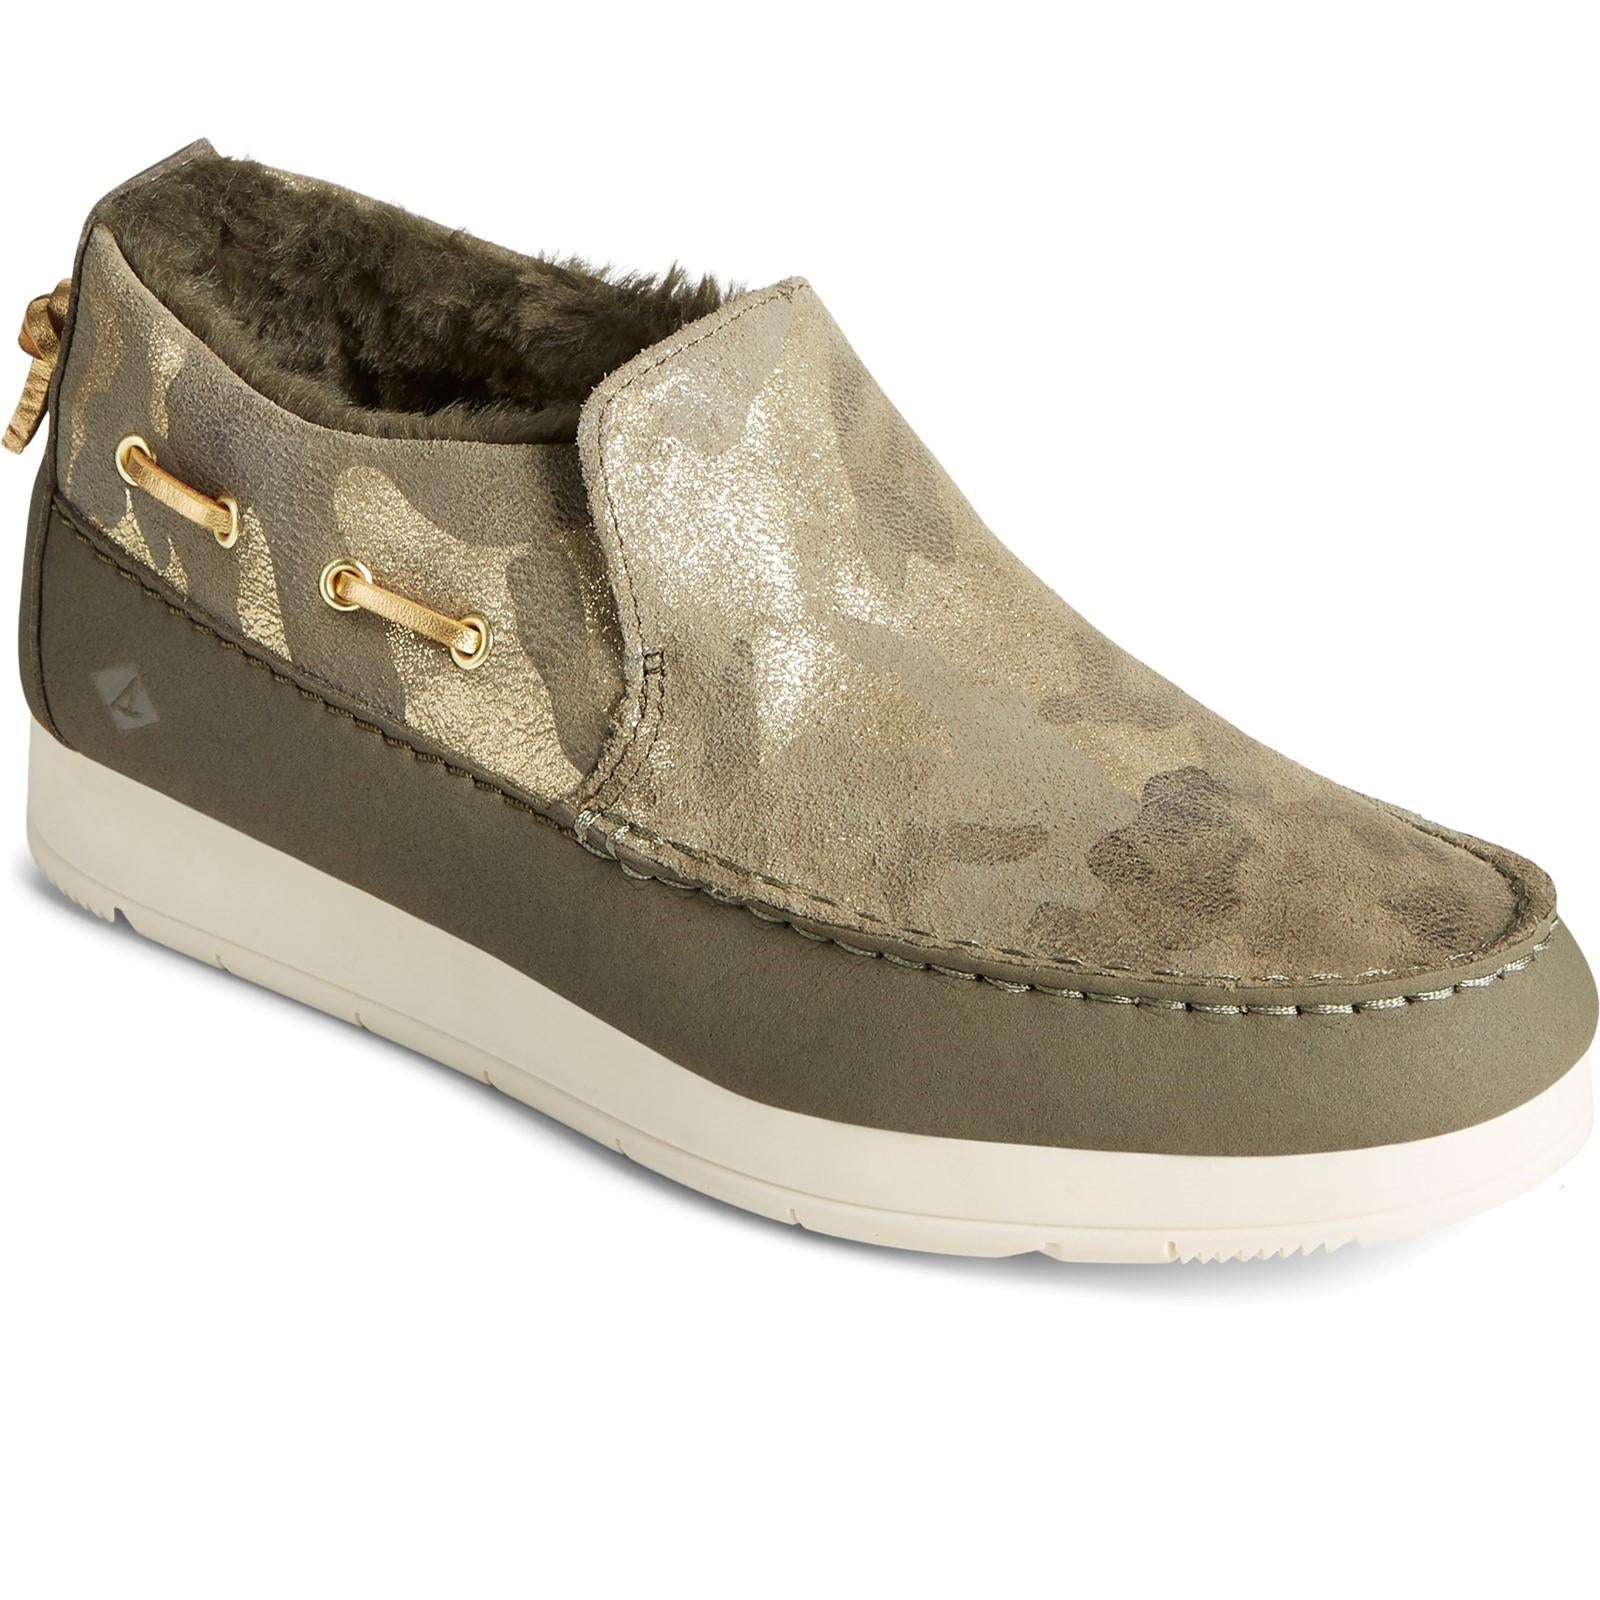 Sperry Top-sider Moc-Sider Metallic Shoes